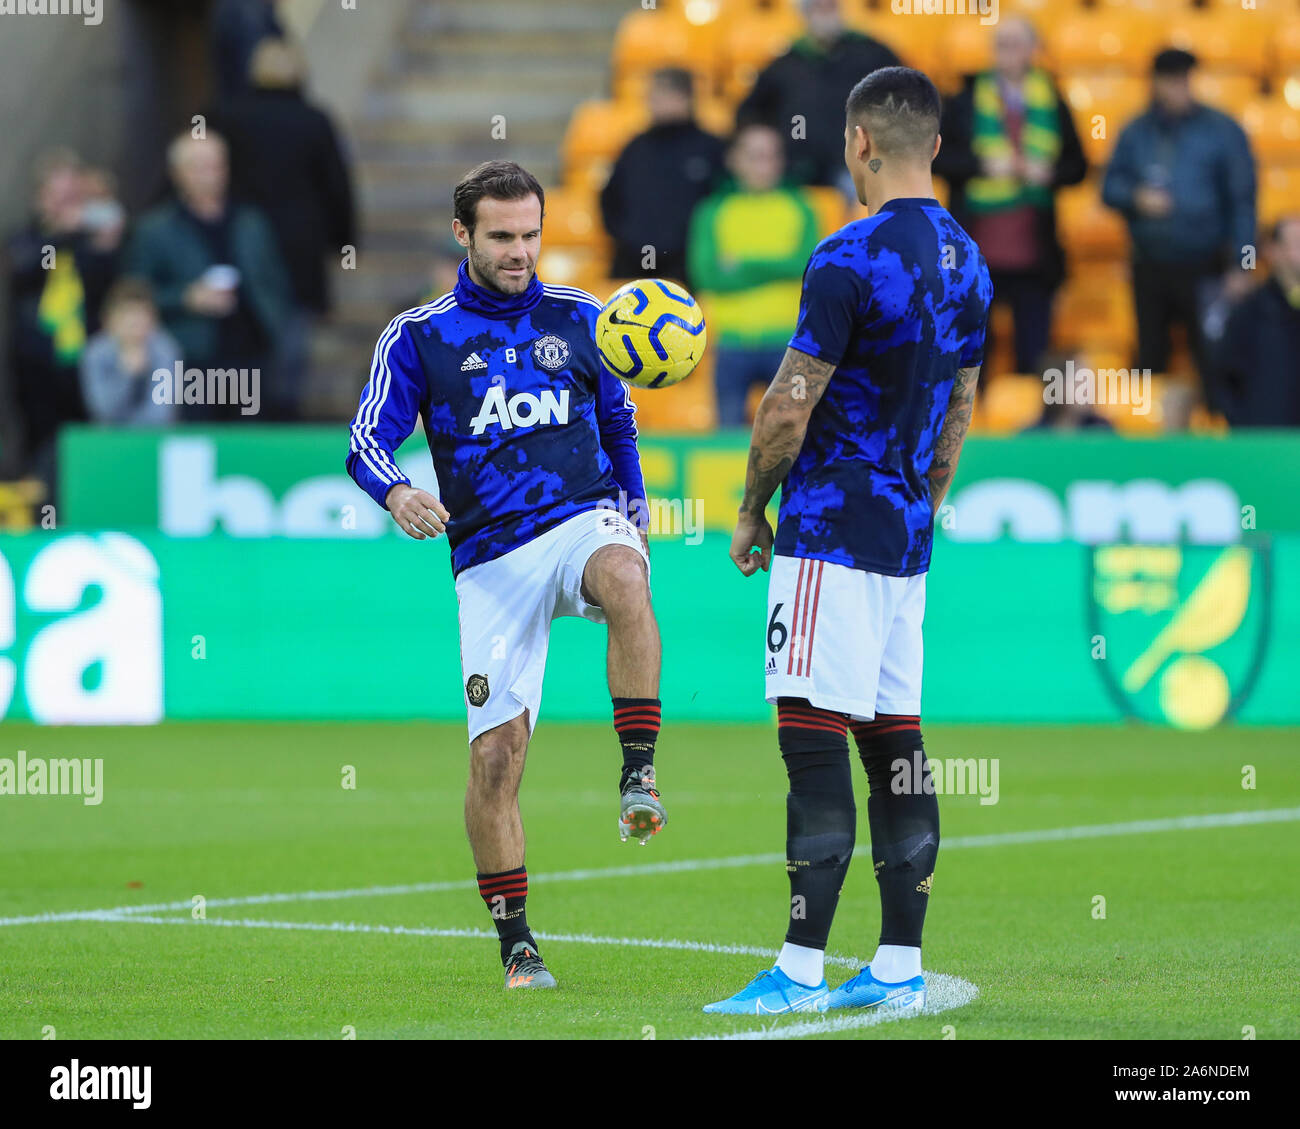 27th October 2019, Carrow Road, Norwich, England; Premier League, Norwich City v Manchester United : Juan Mata (8) of Manchester United warming up  Credit: Mark Cosgrove/News Images Stock Photo